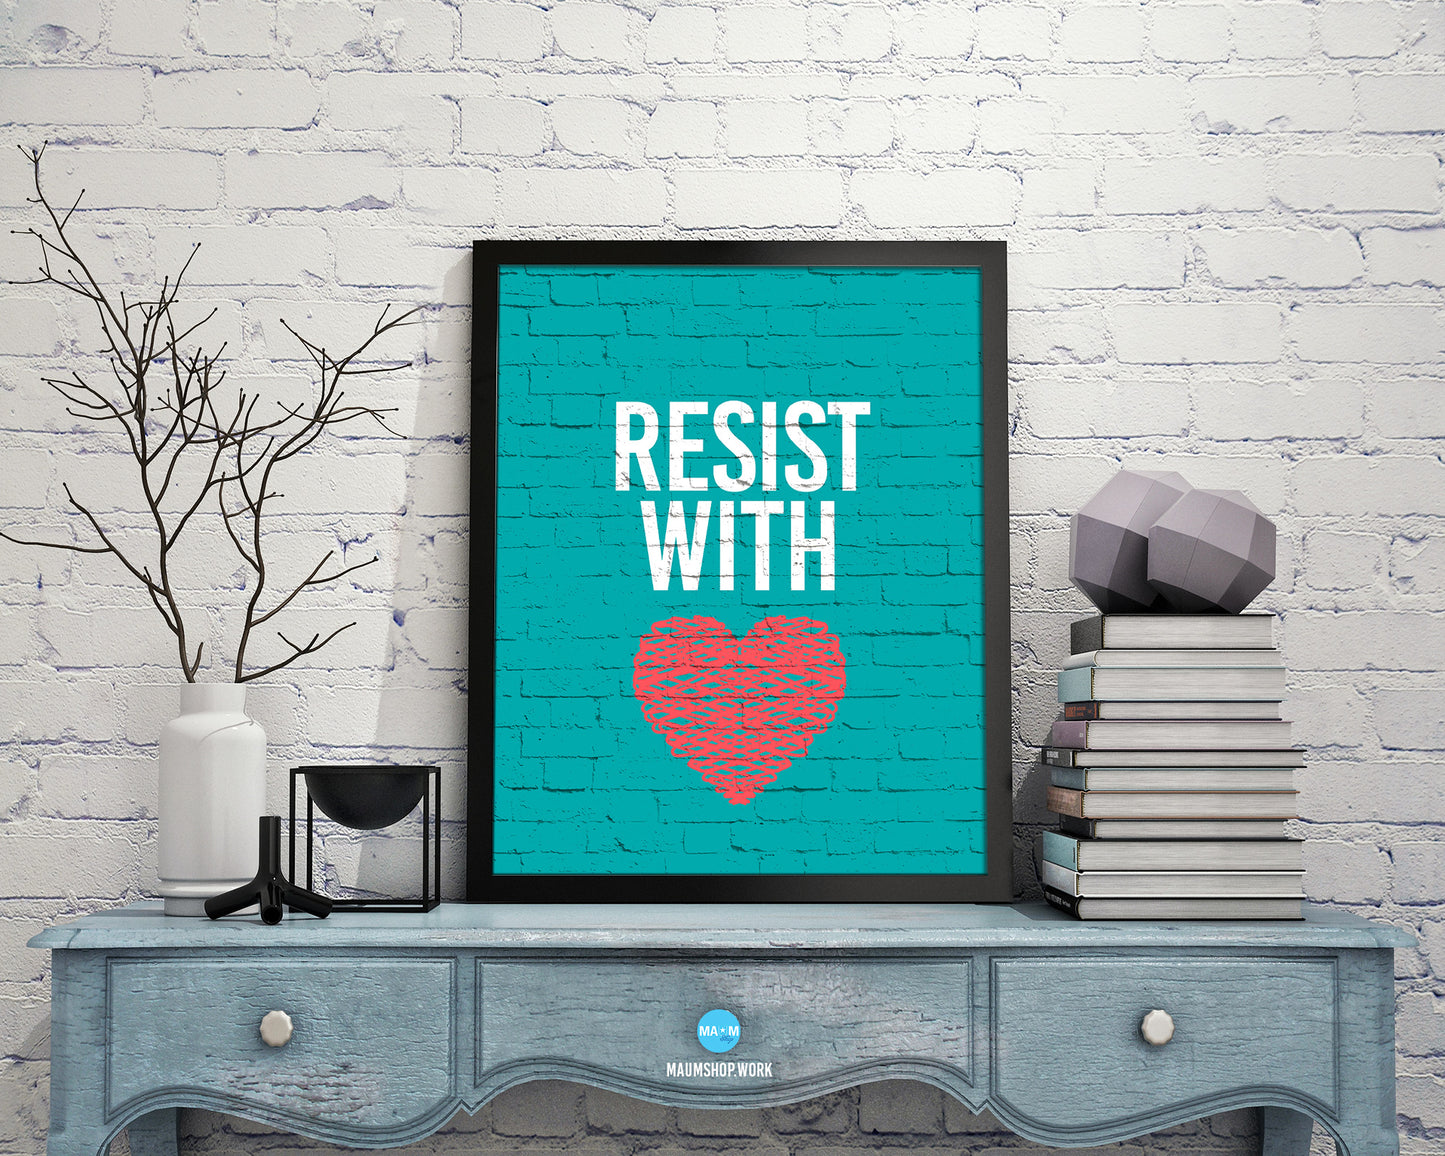 Resist With Love Rainbow Pride Peace Right Justice Poster Wood Framed Wall Decor Print Gifts